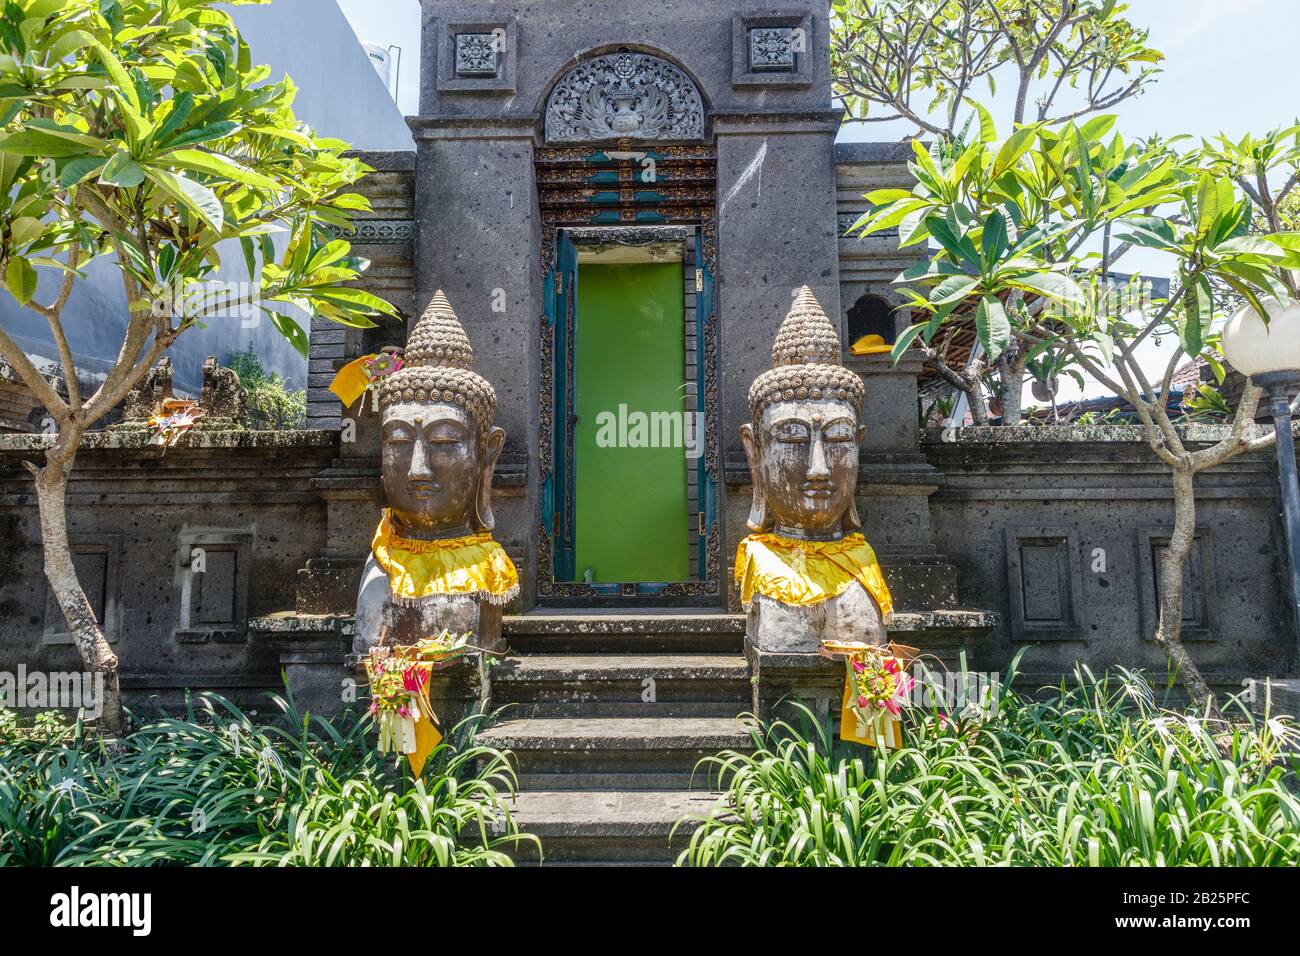 Balinese Fabric High Resolution Stock Photography and Images - Alamy